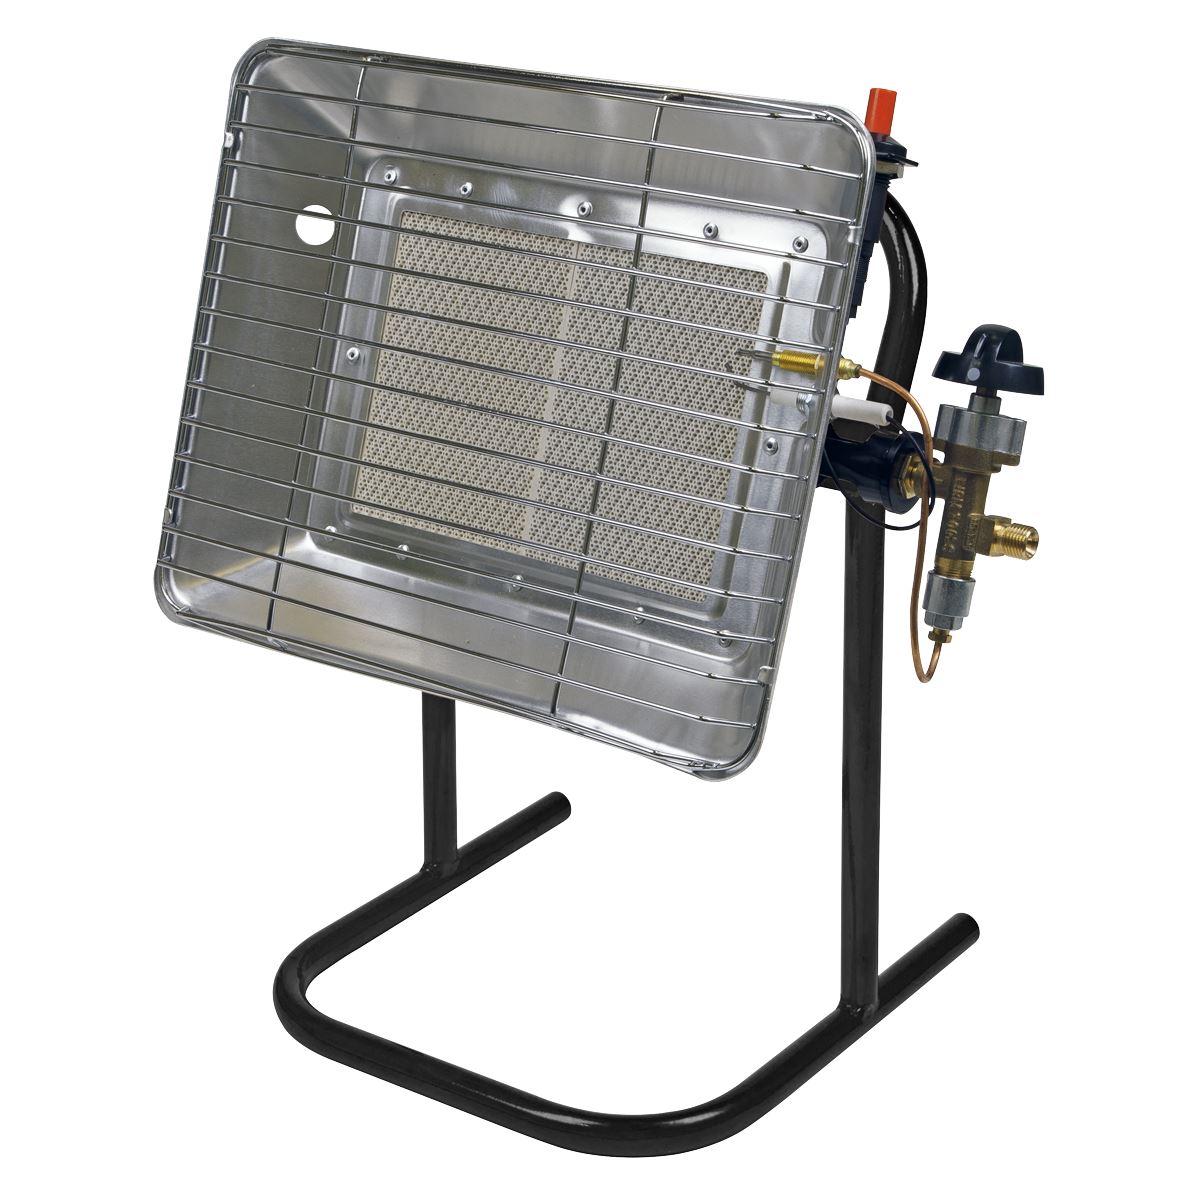 Sealey Space Warmer® Propane Heater with Stand 10,250-15,354Btu/hr